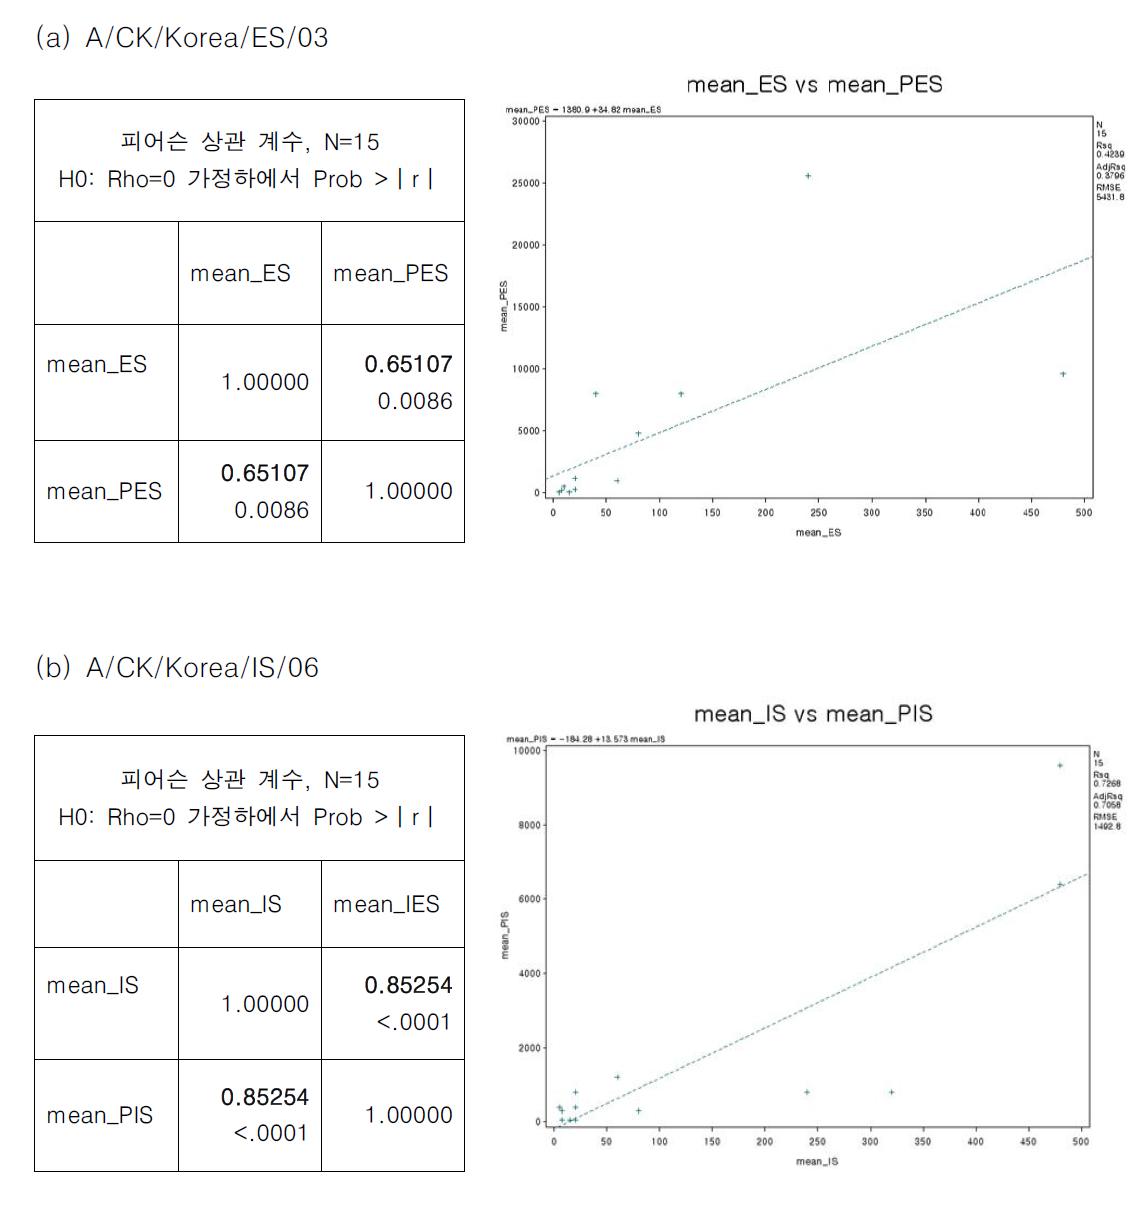 Pearson R coefficient of MN results for A/CK/Korea/ES/03 and A/CK/Korea/IS/06